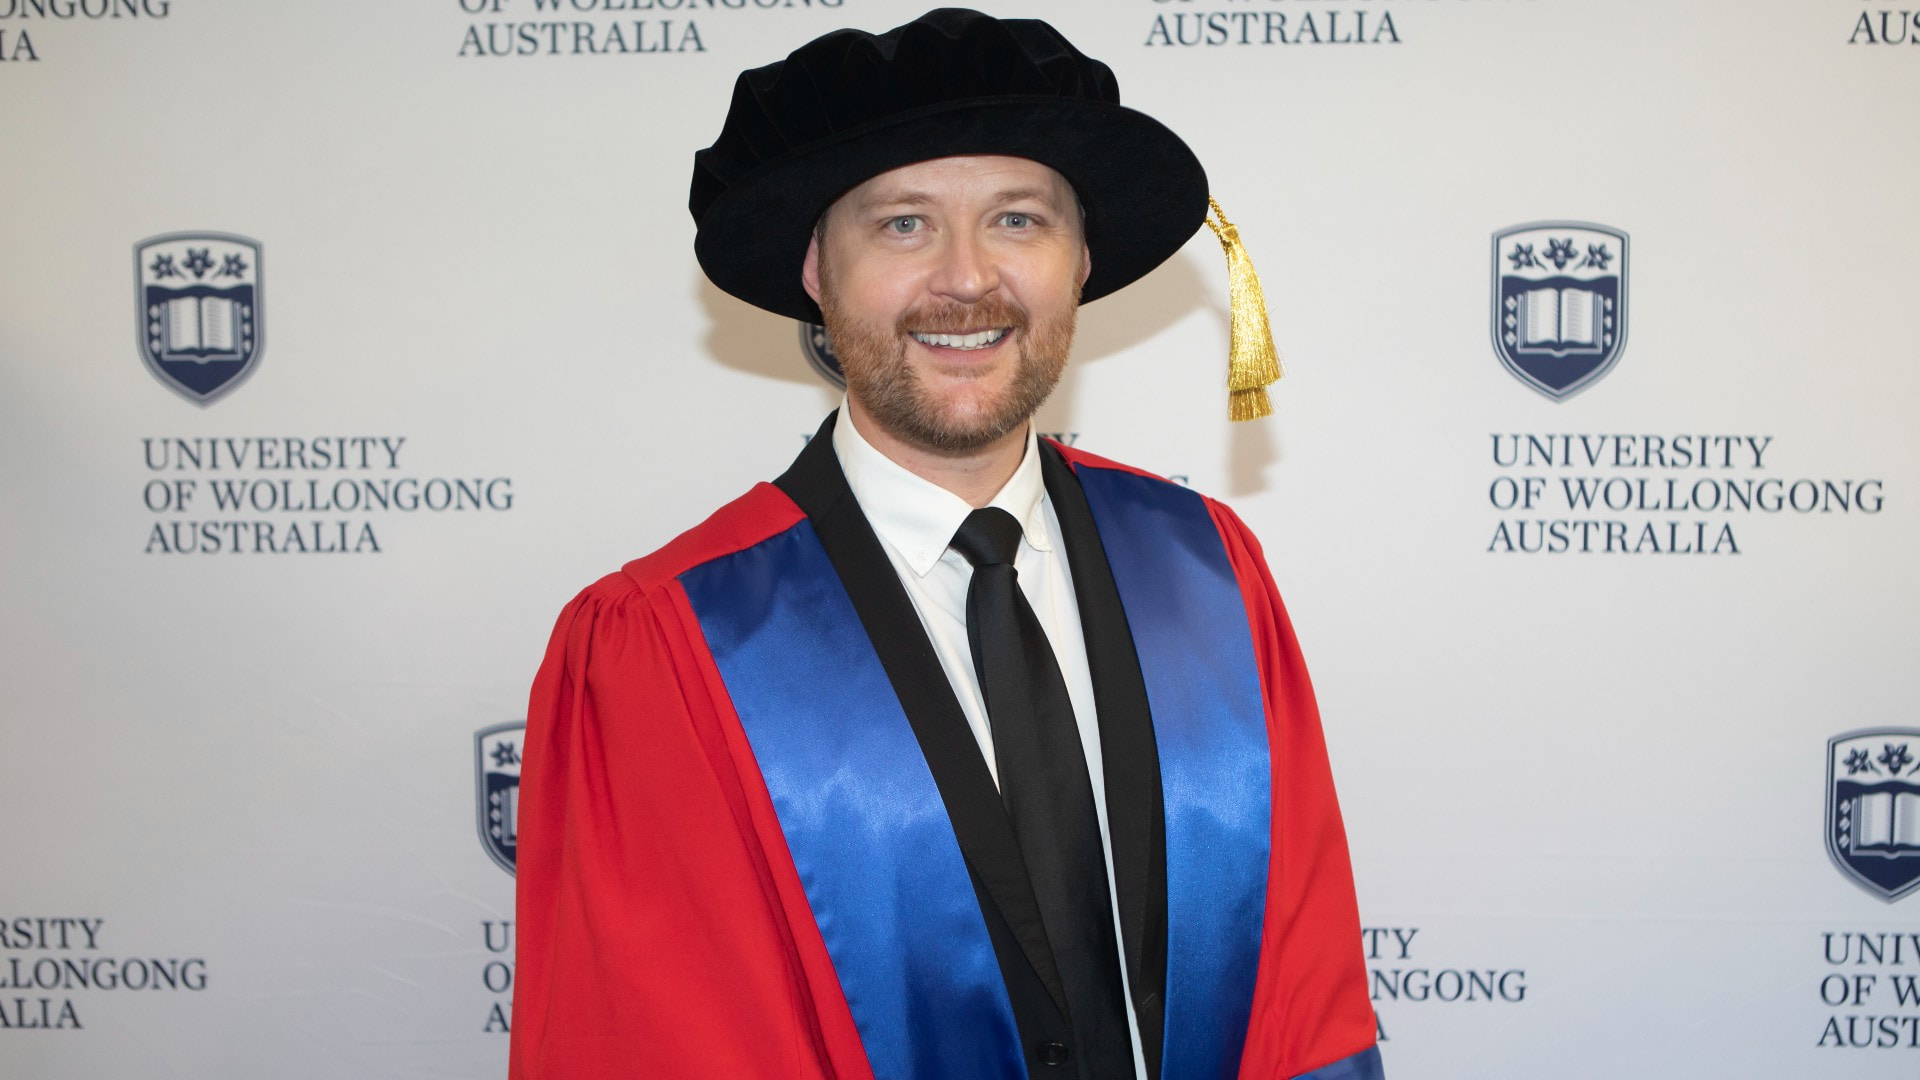 Theatre producer Michael Cassel, pictured against a UOW wall, wearing his graduation gown and cap. Photo: Mark Newsham